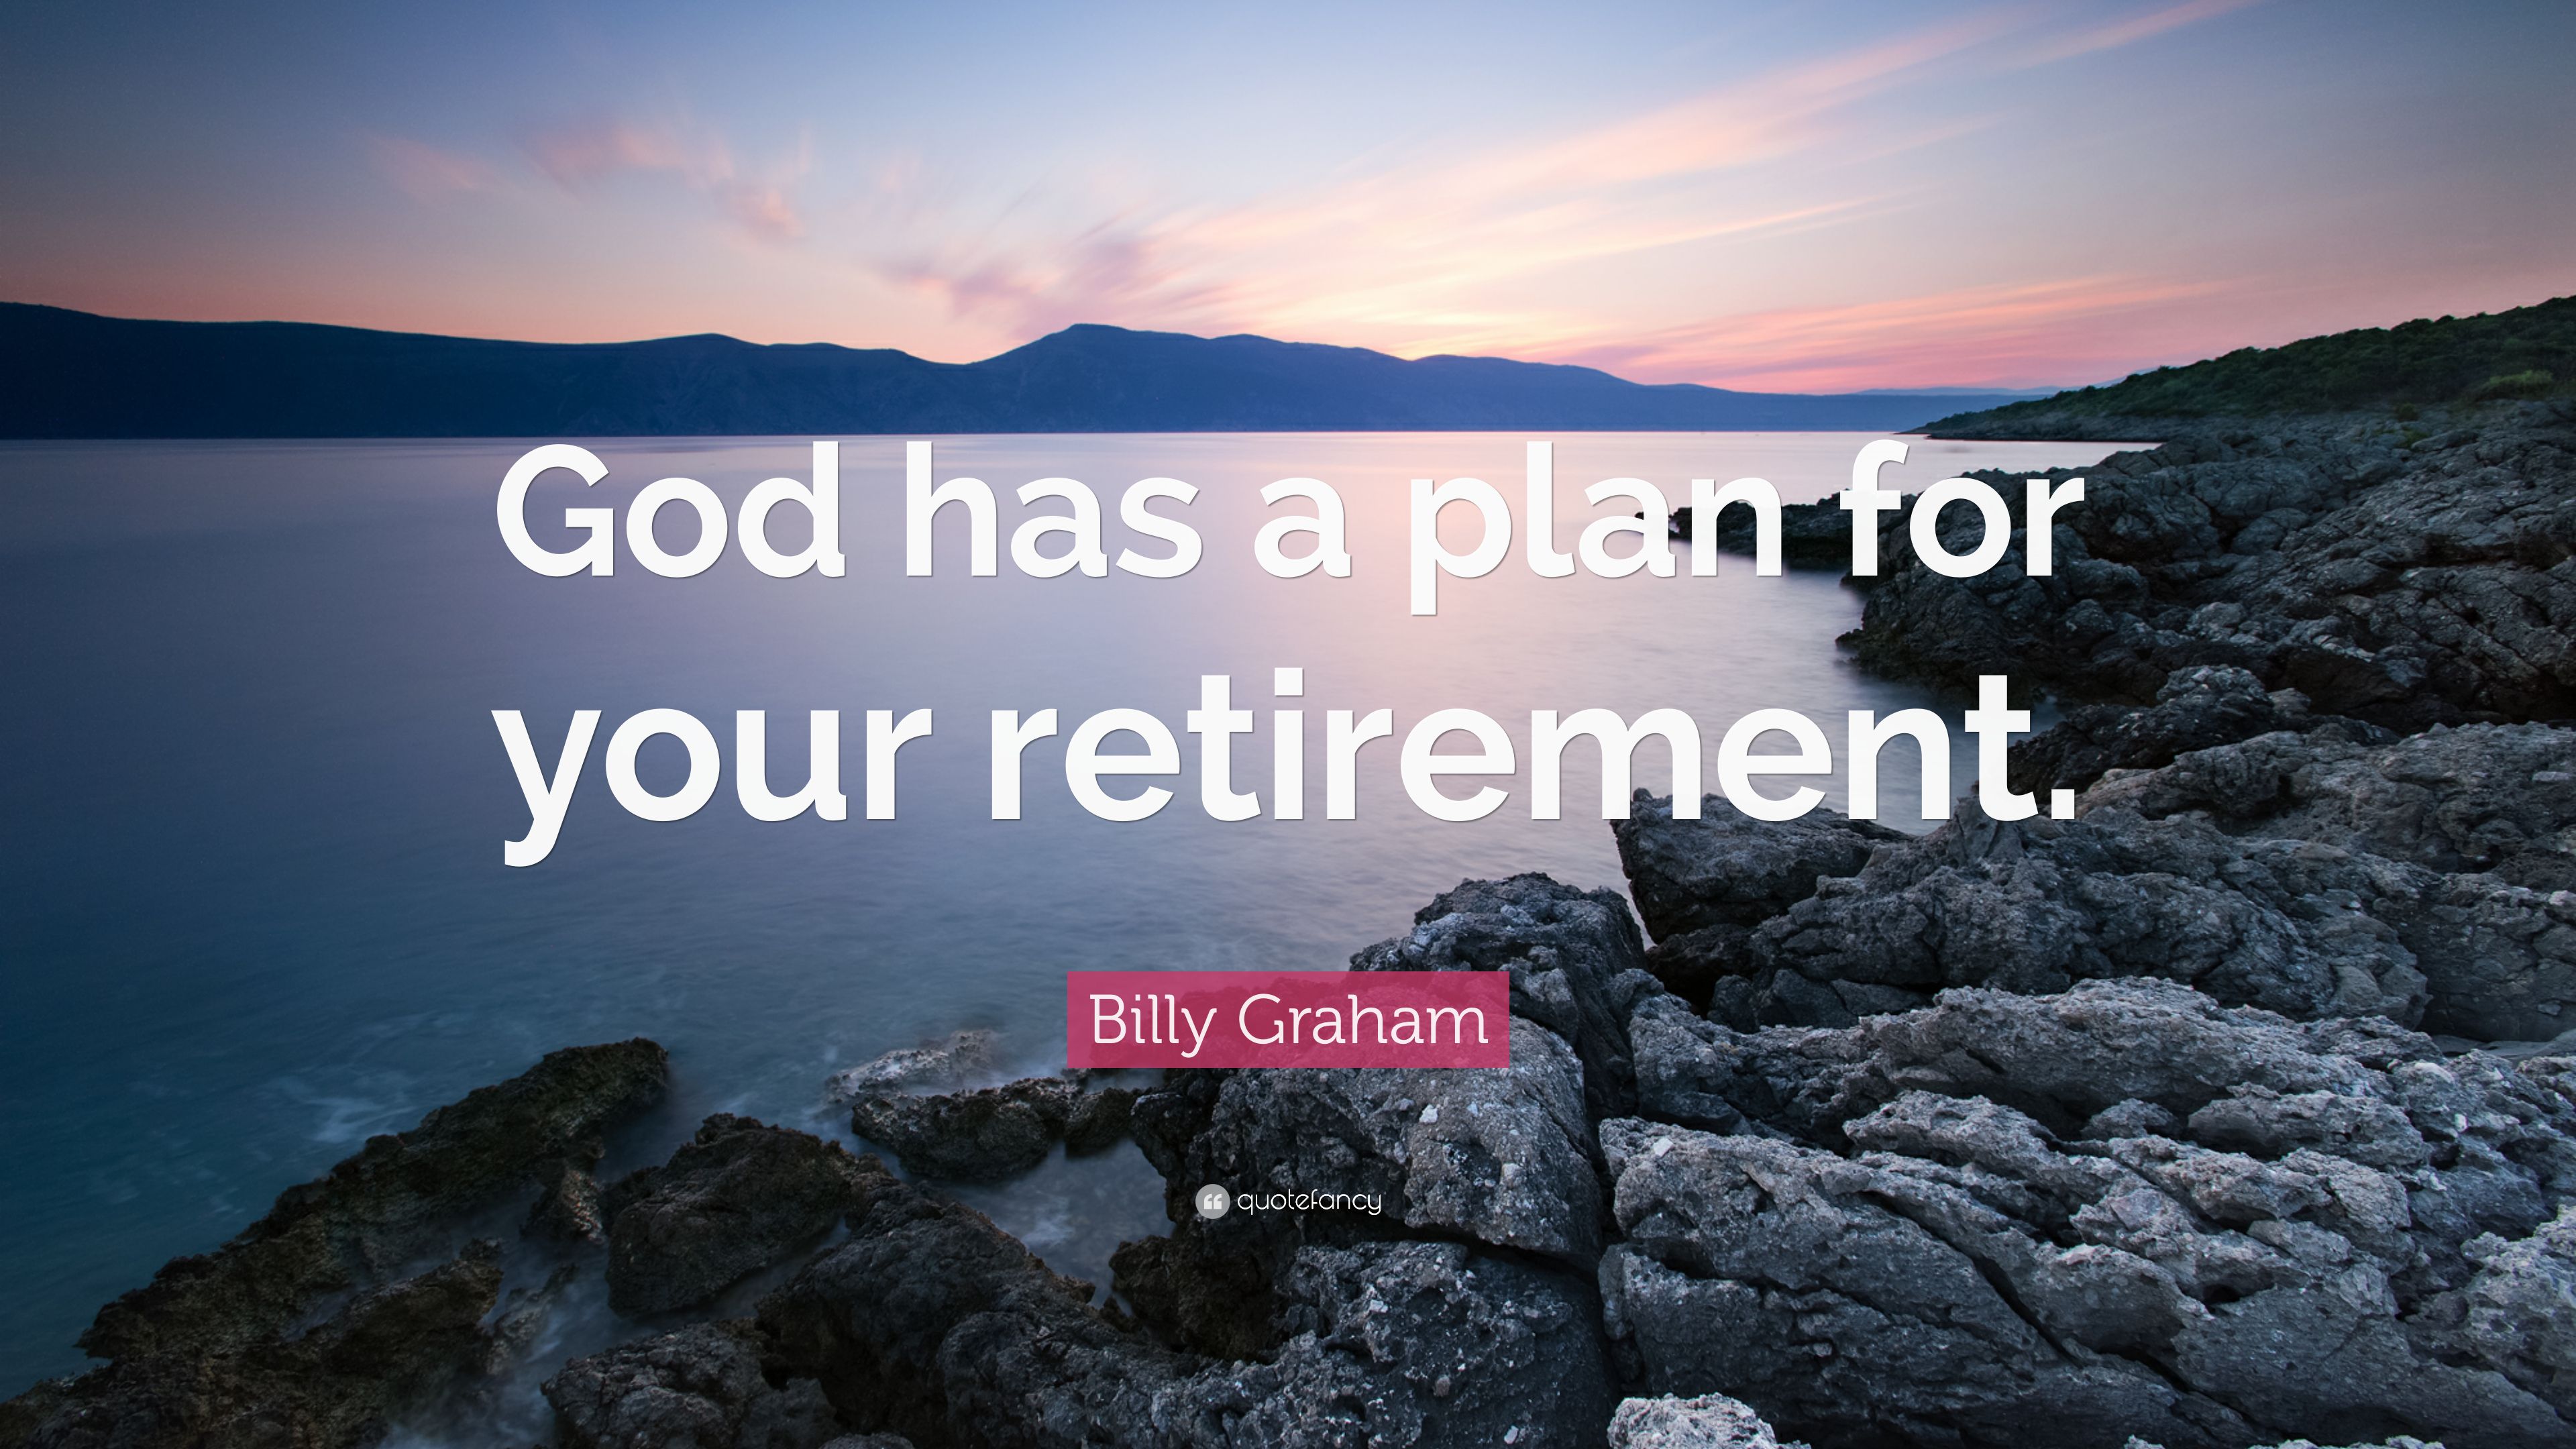 Billy Graham Quote: “God has a plan for your retirement.” 12